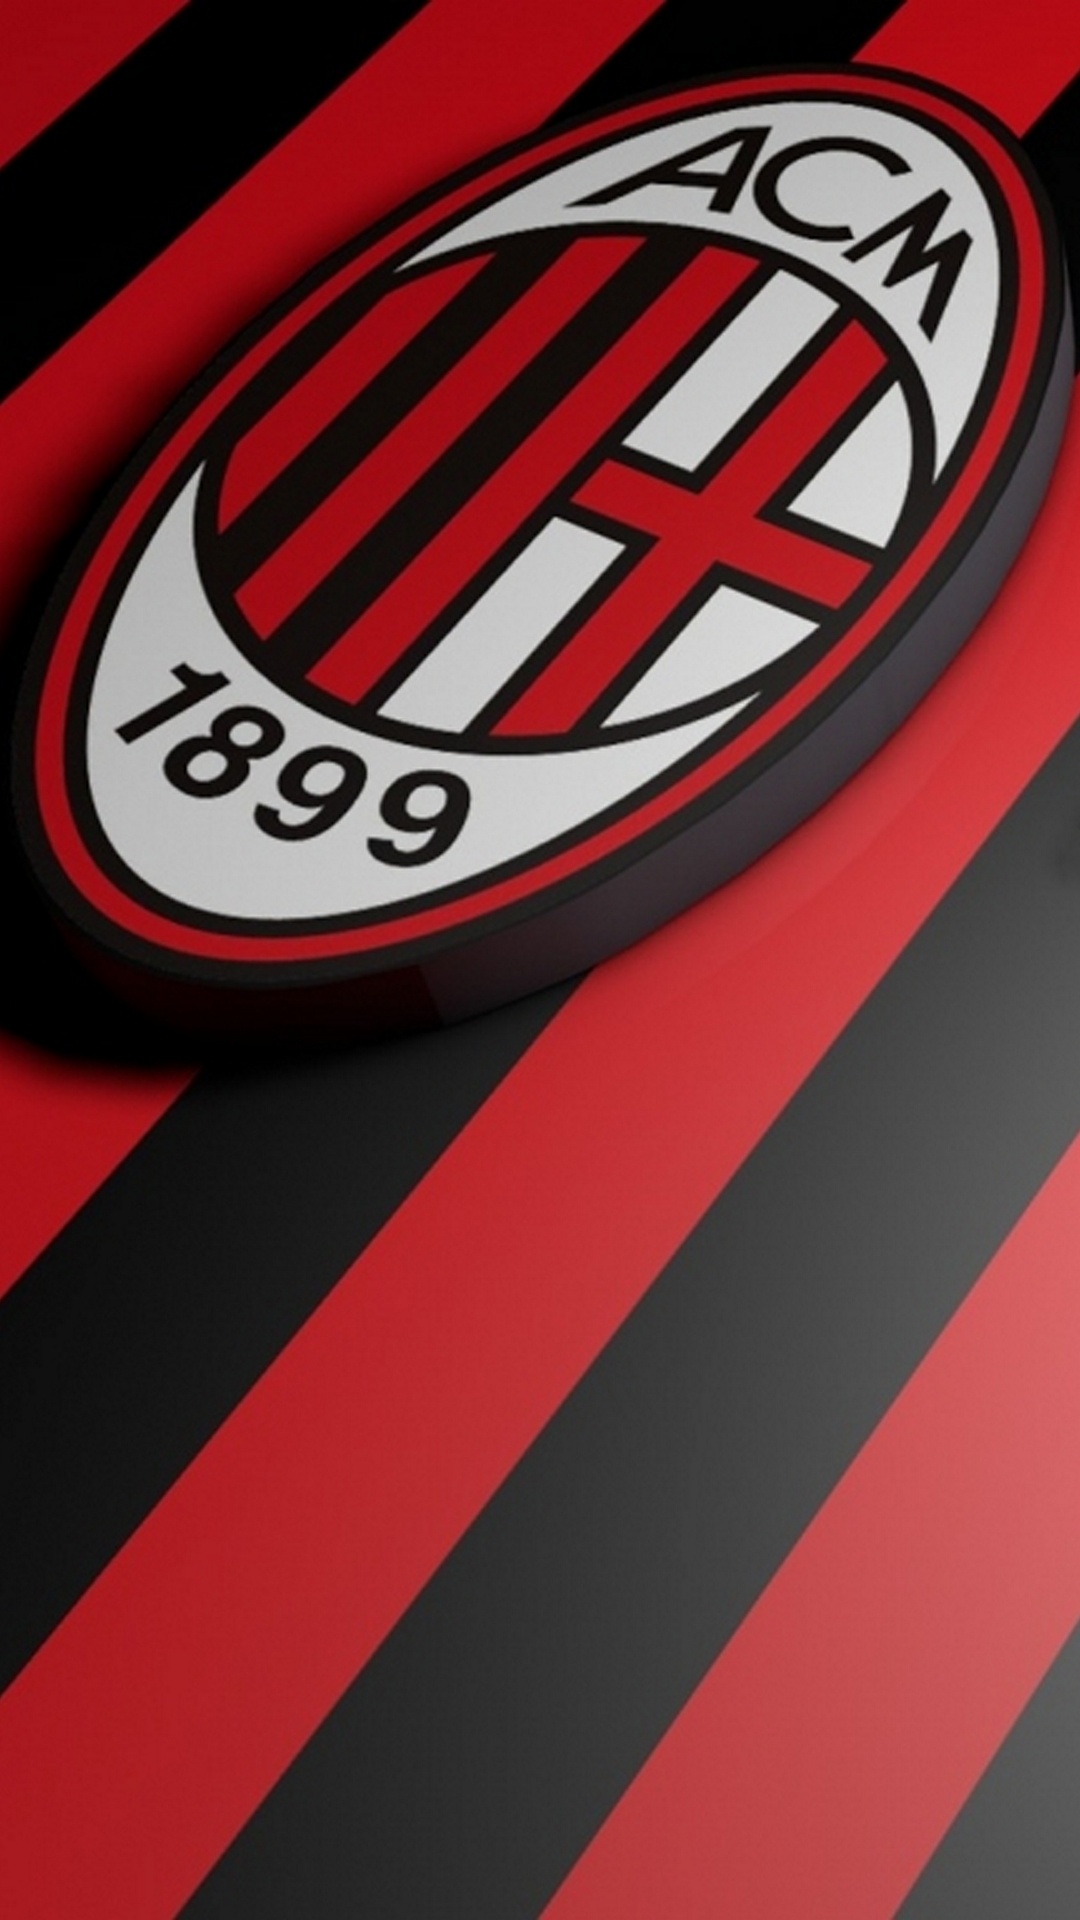 AC Milan, Full HD wallpapers, Quality images, Official merchandise, 1080x1920 Full HD Phone